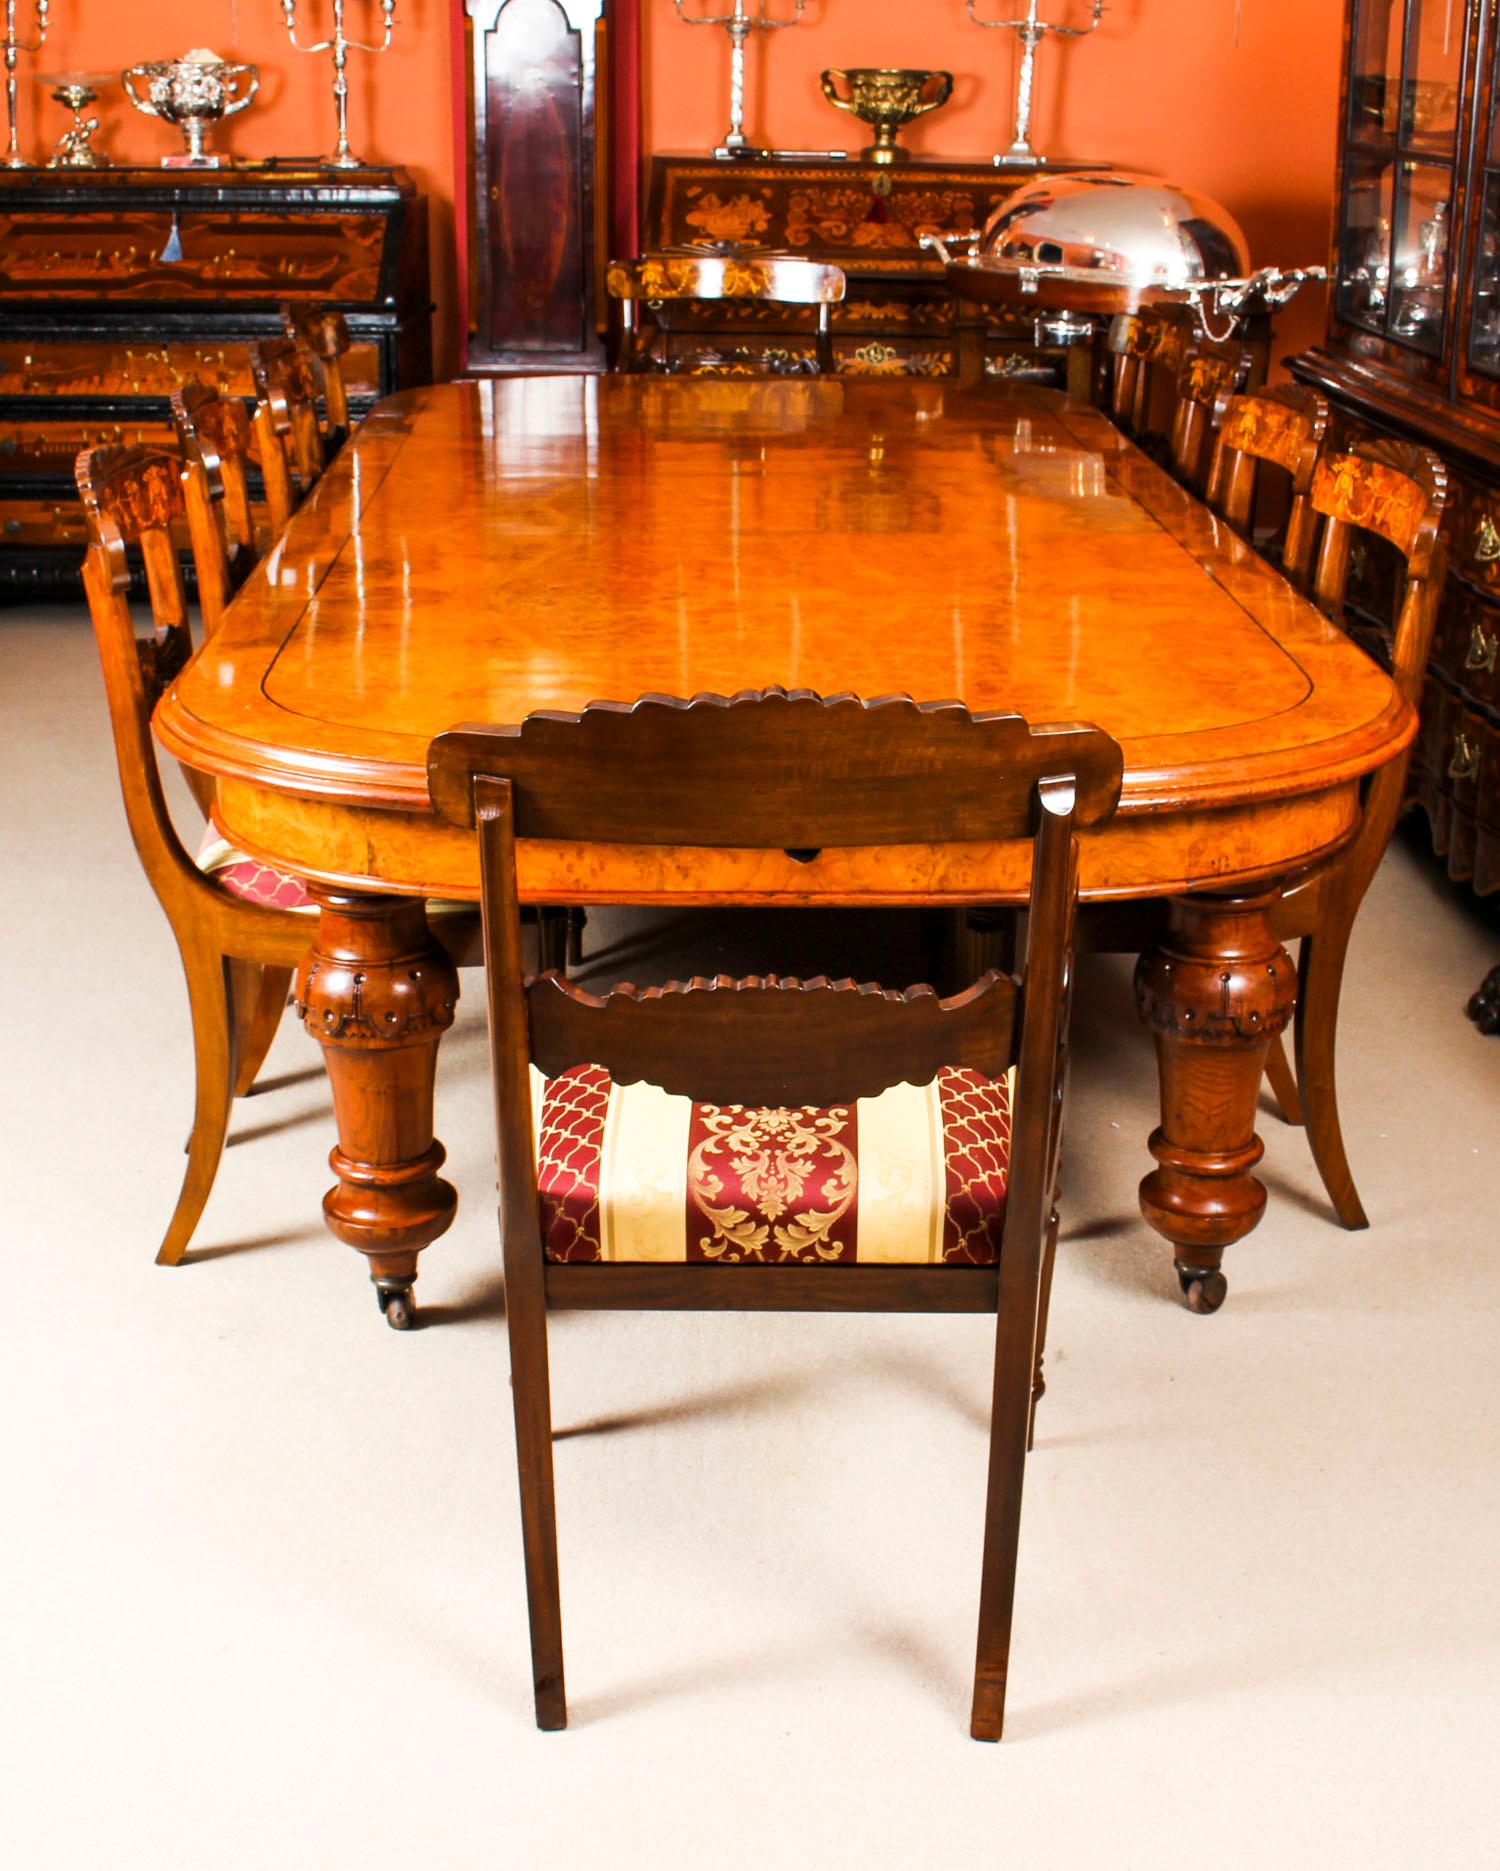 There is no mistaking the style and sophisticated design of this fabulous dining set comprising a rare English antique Victorian pollard oak extending dining table, circa 1850 in date and a set of ten contemporary dining chairs. 
The styles that